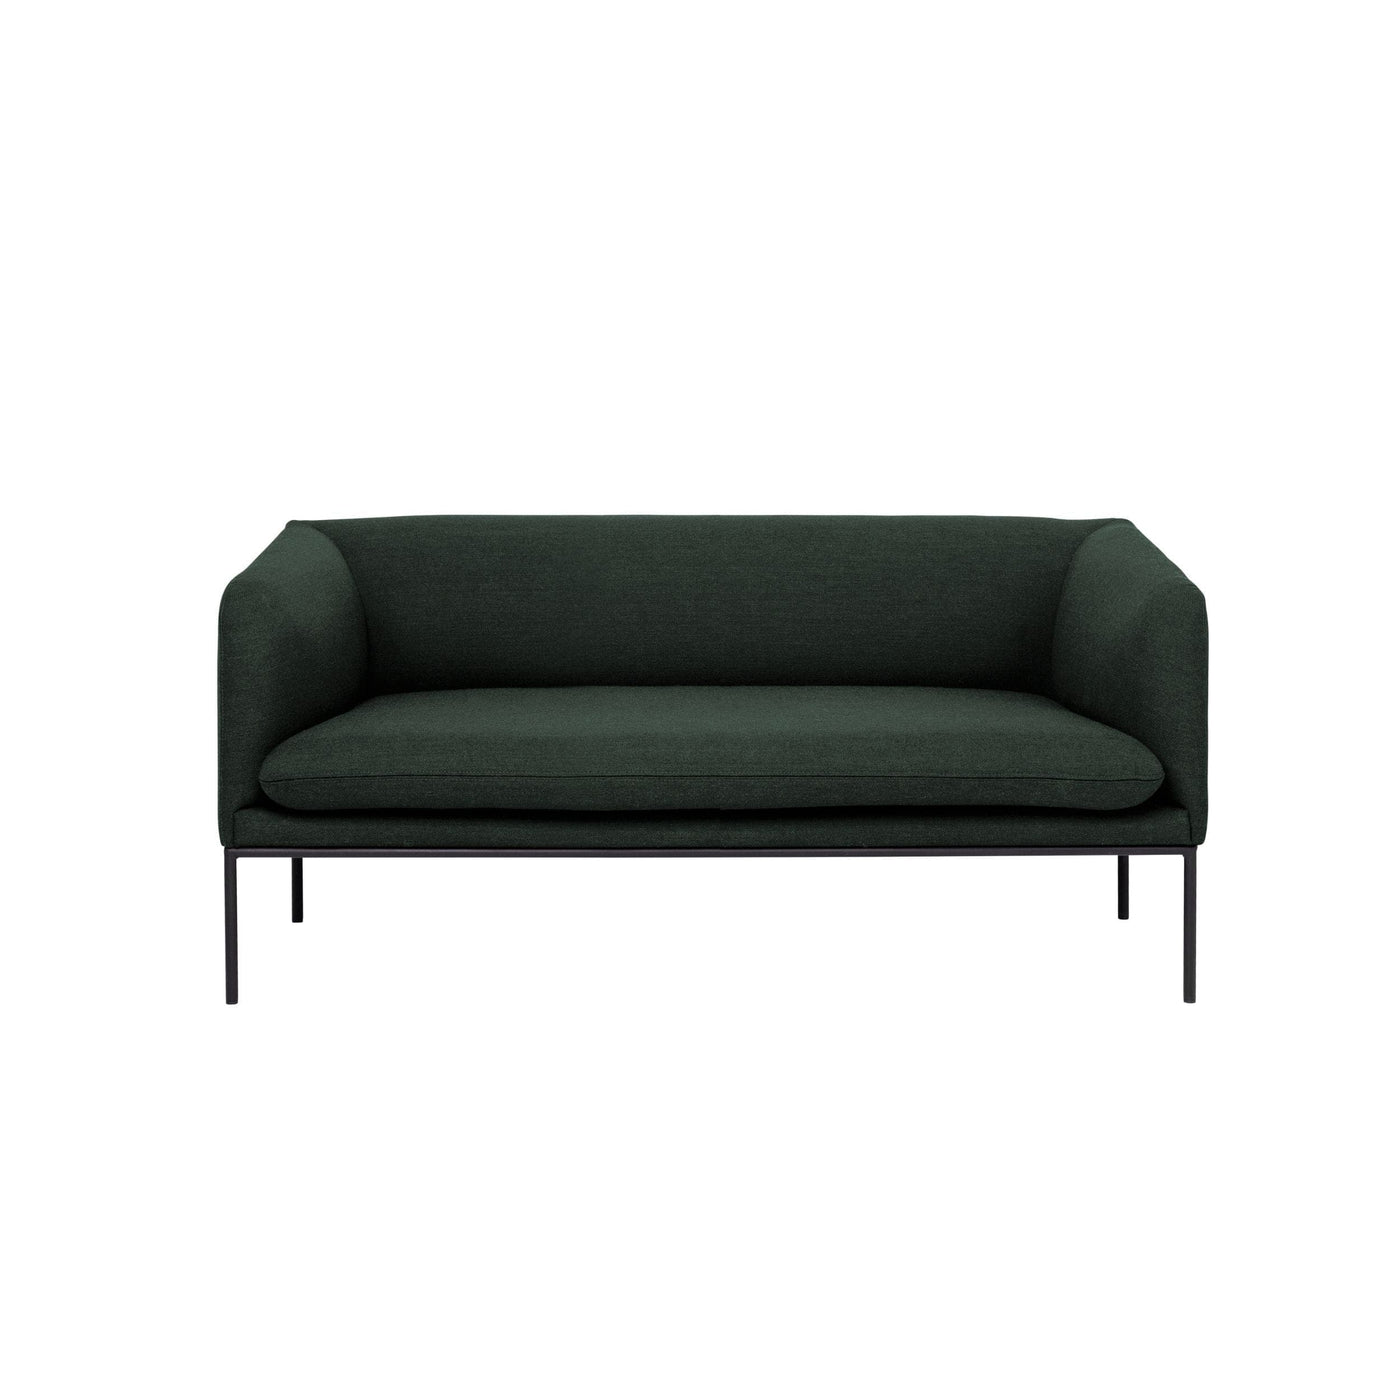 Ferm Living Turn sofa 2 seater, dark green fiord by Kvadrat fabric. Made to order from someday designs. #colour_dark-green-fiord-by-kvadrat